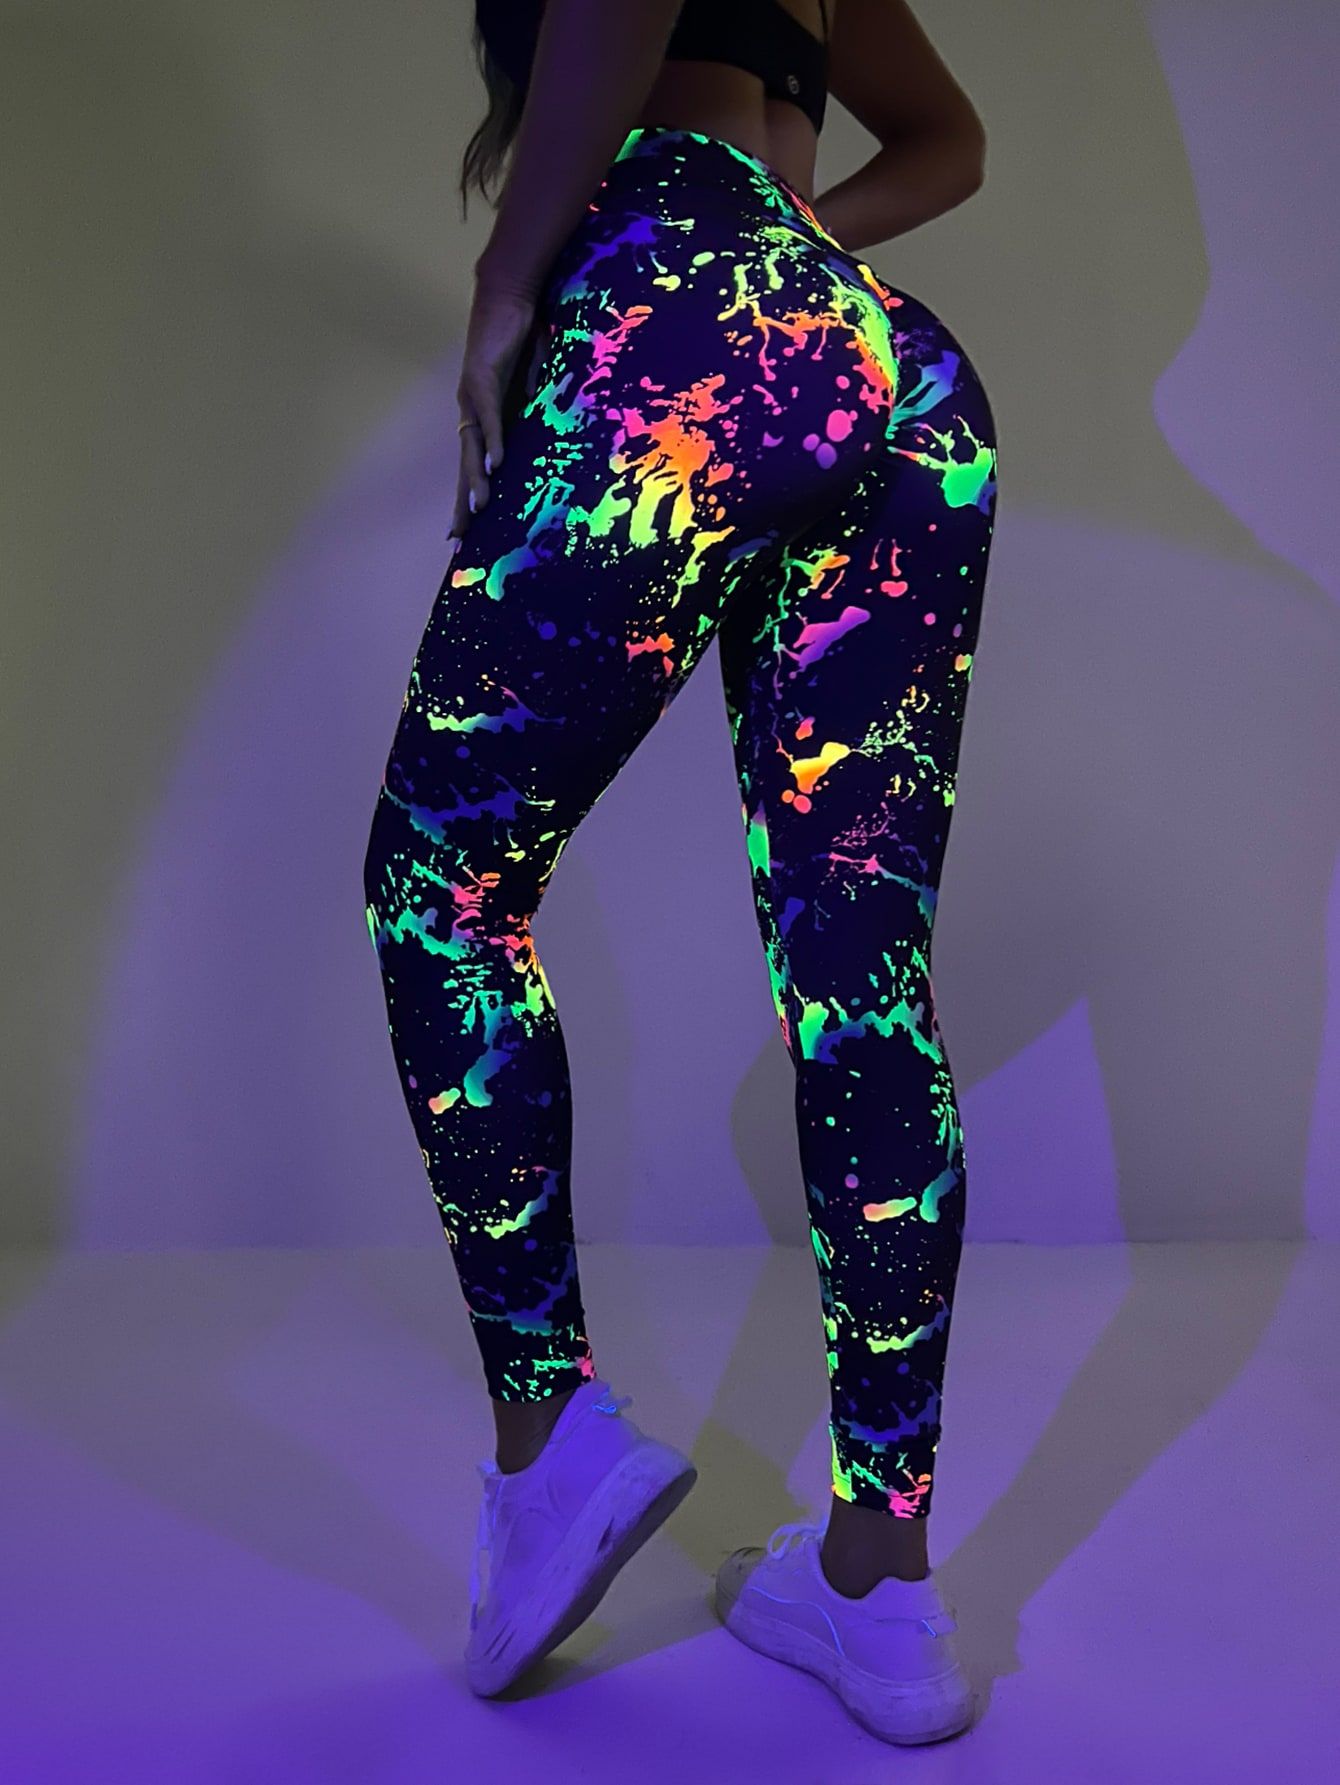 Neon Leggings With Bright Surface And
Bold Colors